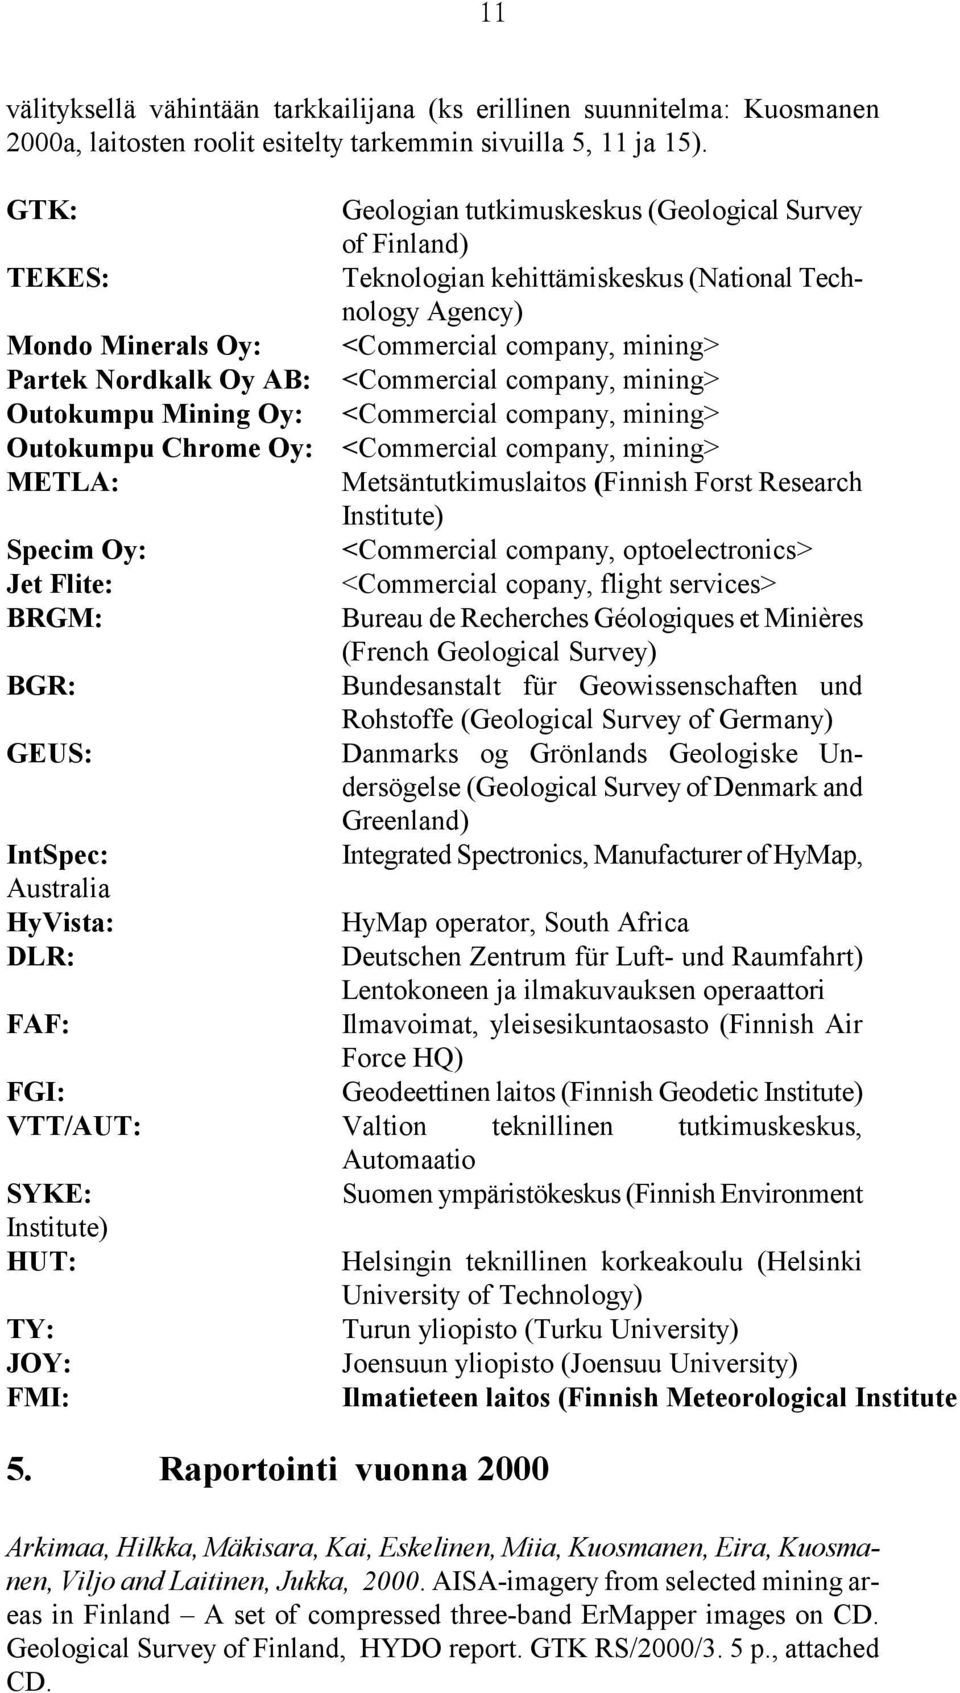 <Commercial company, mining> <Commercial company, mining> <Commercial company, mining> Outokumpu Chrome Oy: <Commercial company, mining> METLA: Metsäntutkimuslaitos (Finnish Forst Research Institute)